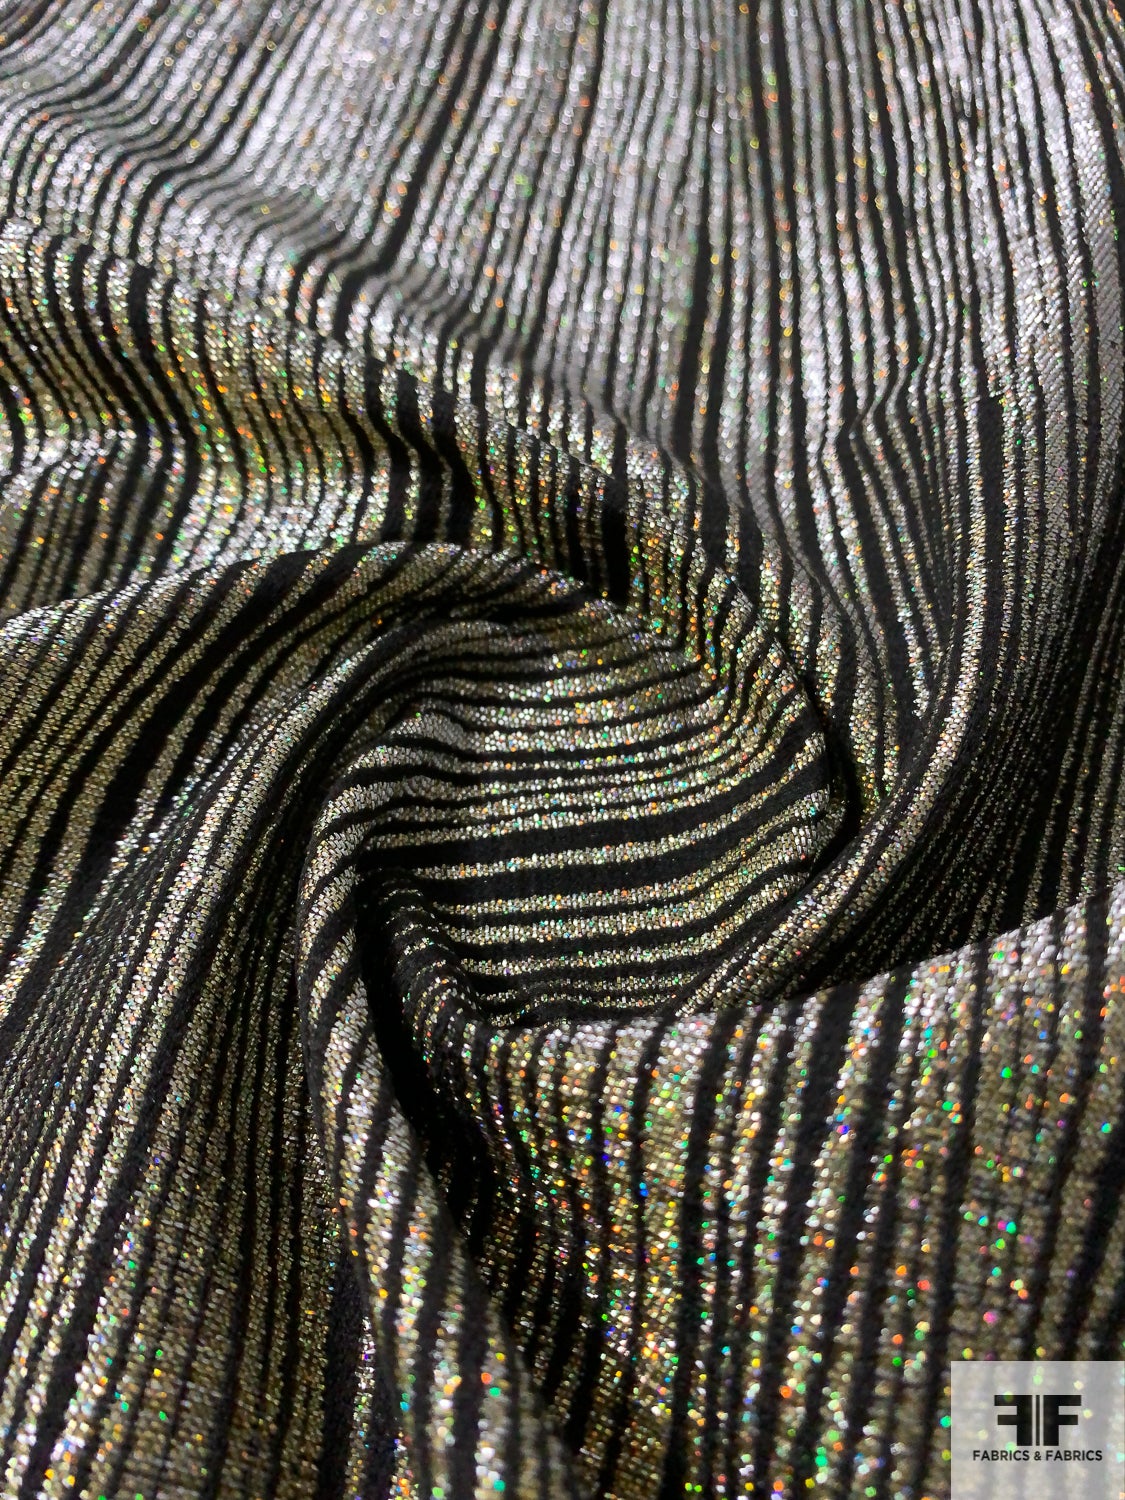 Italian Ladies Suiting with Metallic Wavy Stripes and Vertical Stretch - Aurora Borealis Gold / Black